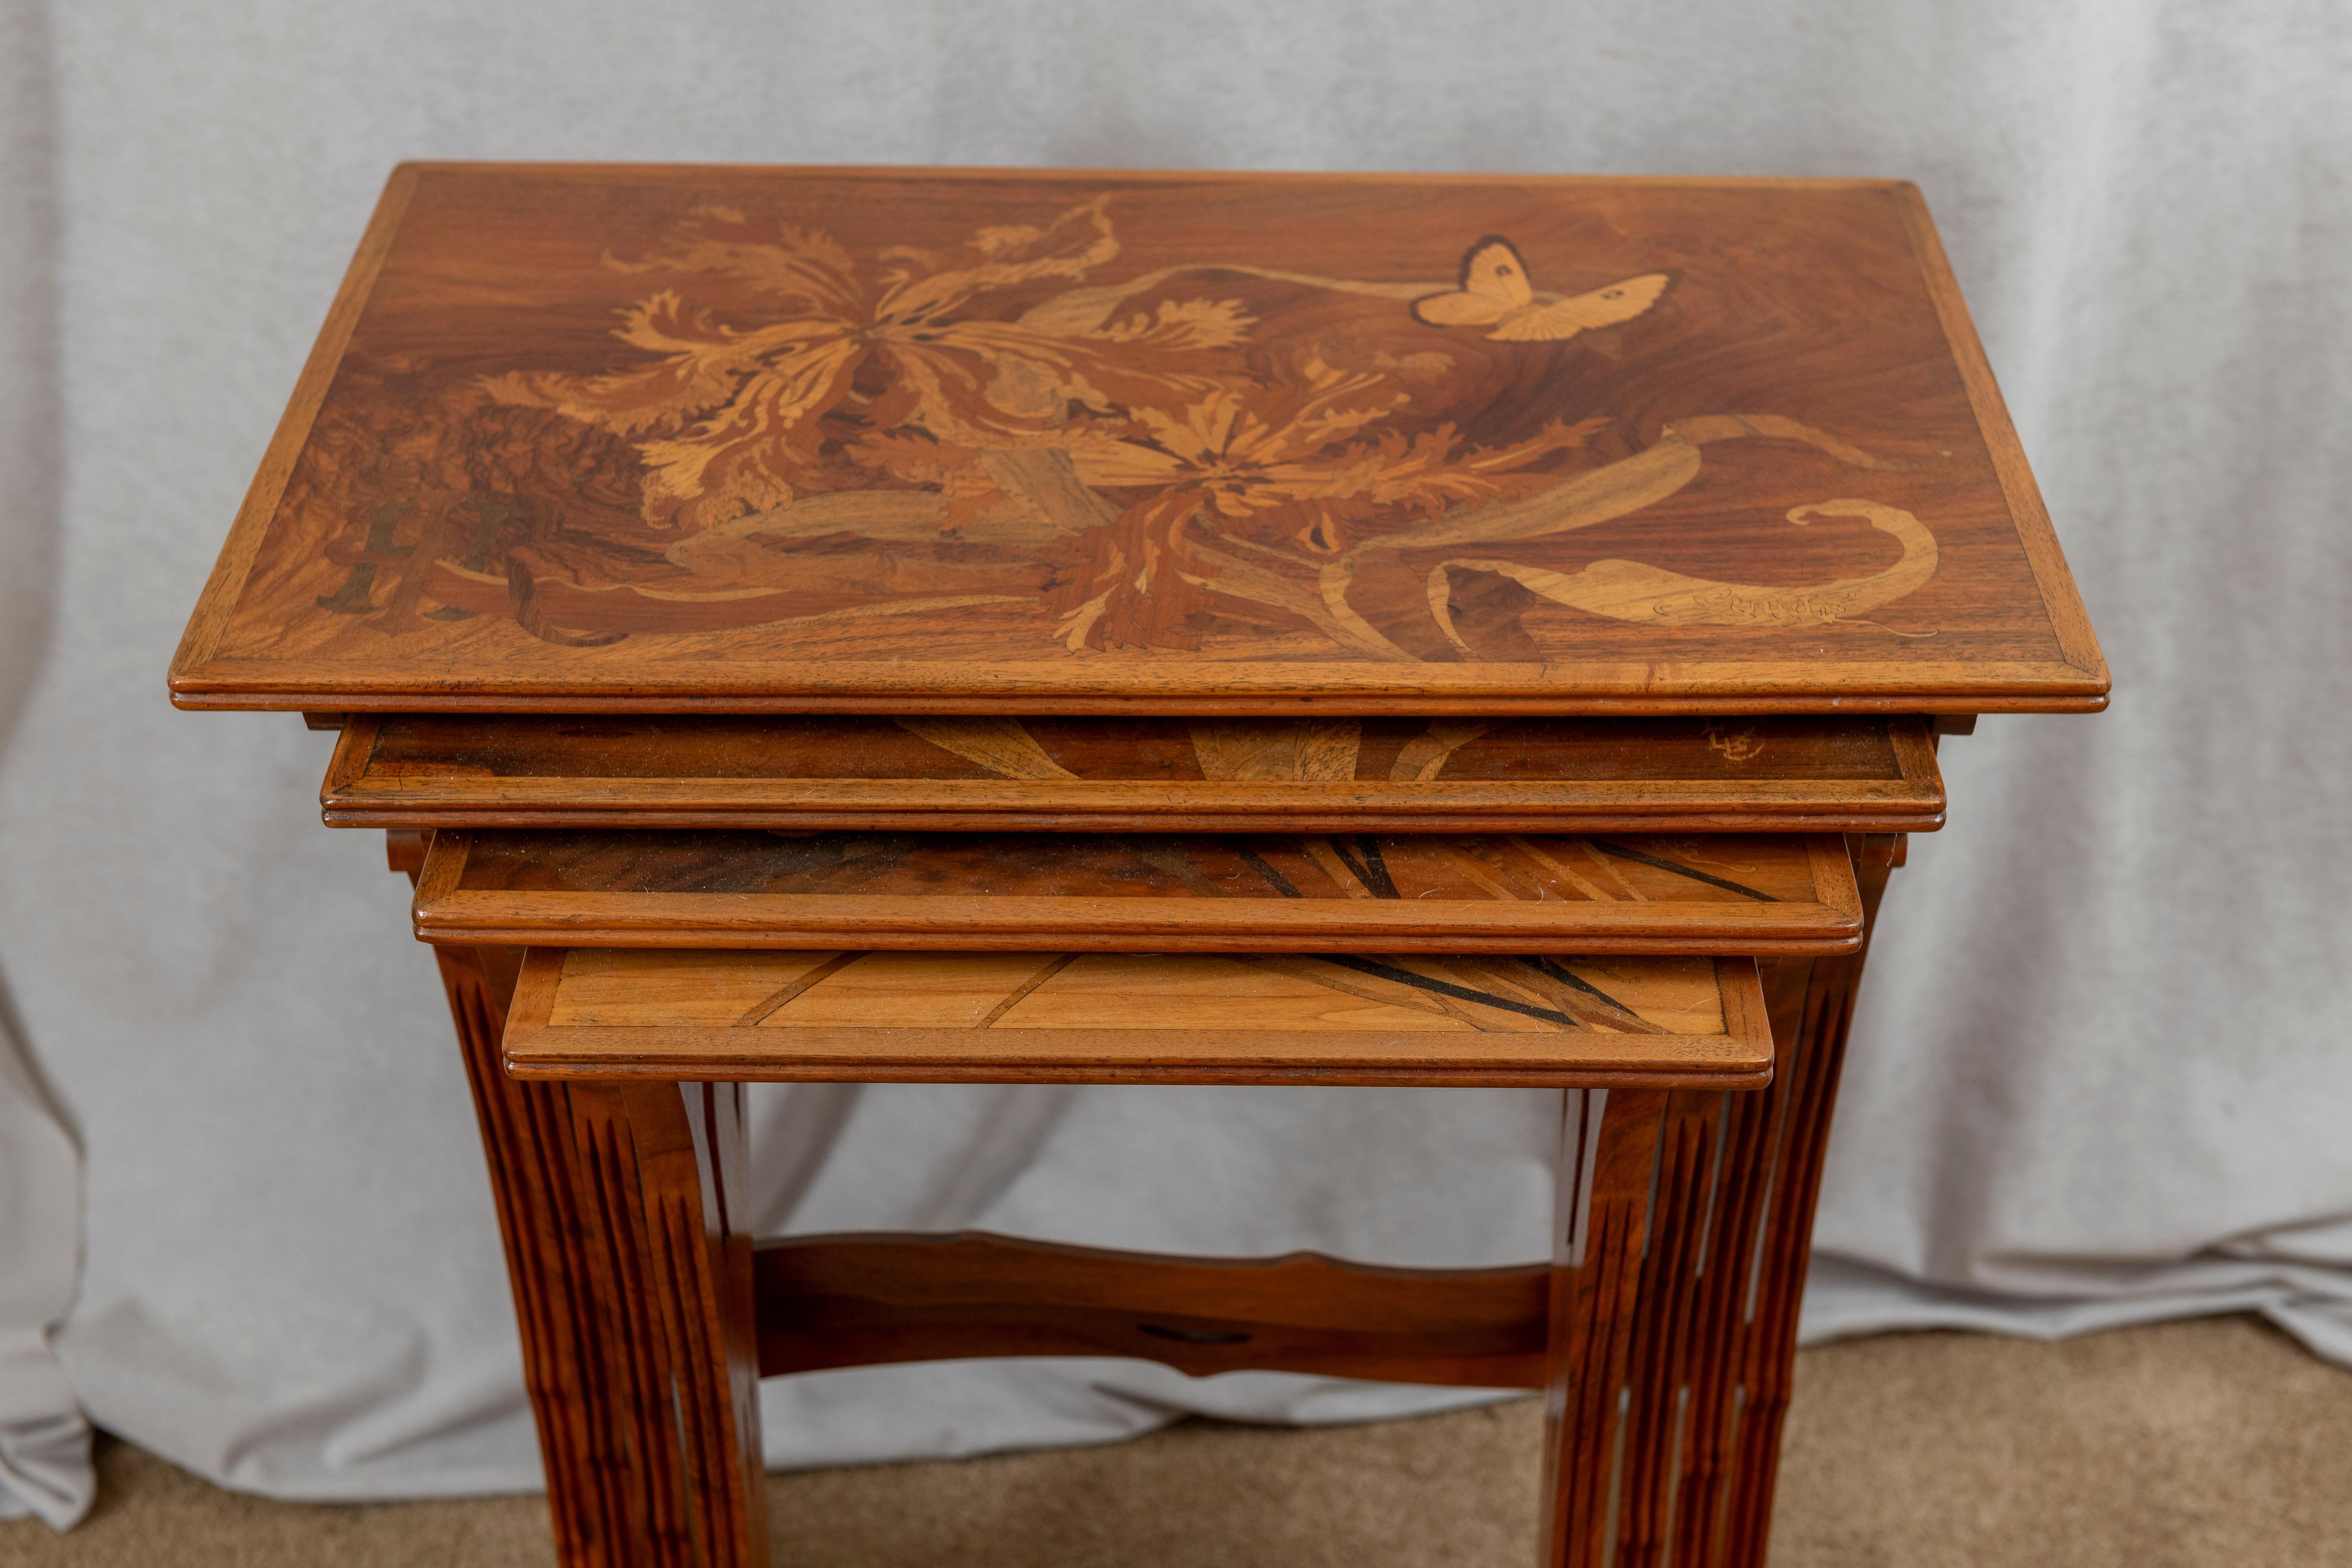 Early 20th Century Emile Gallé Art Nouveau Marquetry Nest of Four Tables, ca. 1900